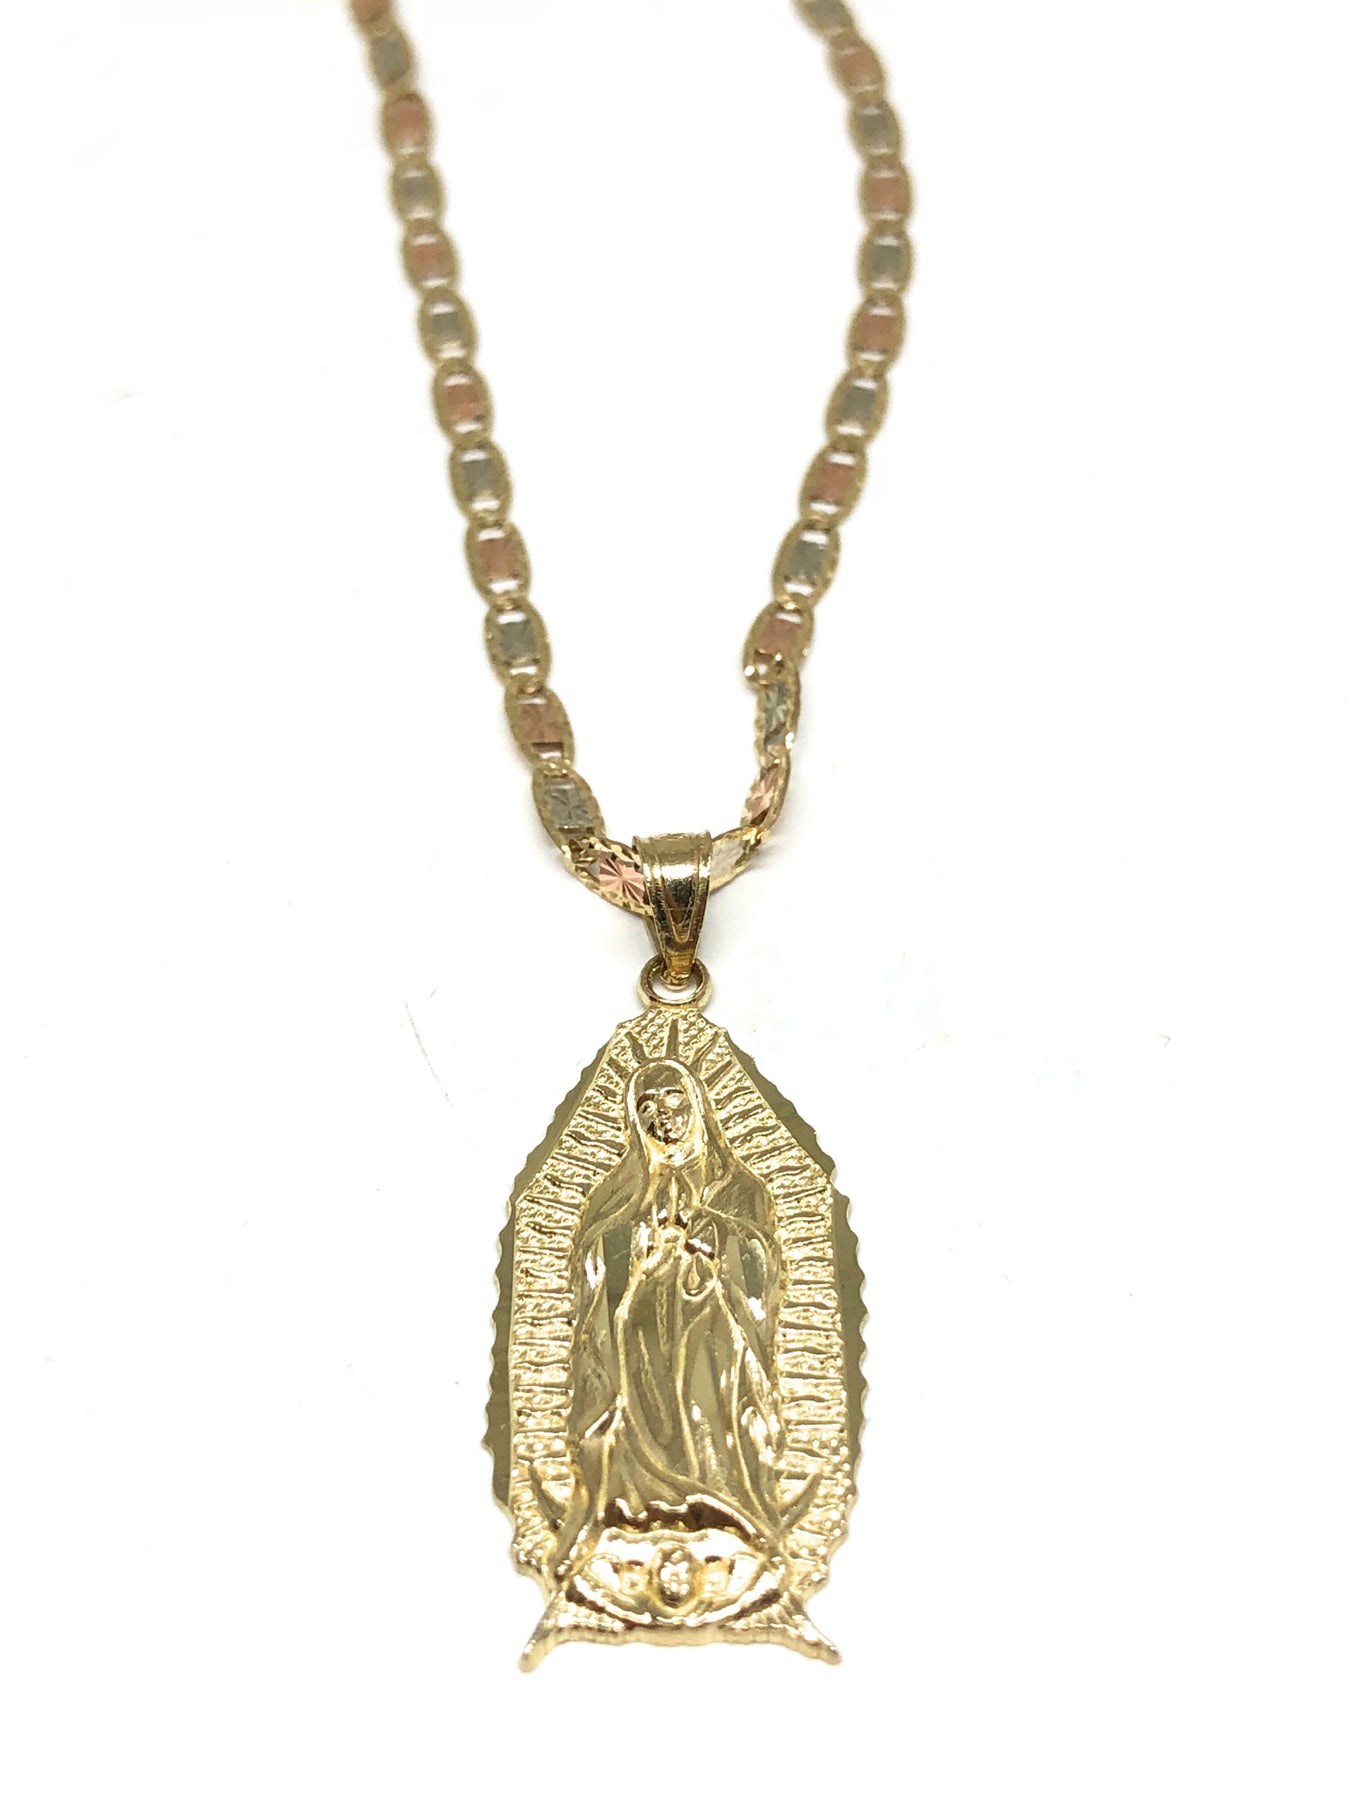 10k Solid Gold Classic Virrgin Mary Pendant Necklace Virrgen